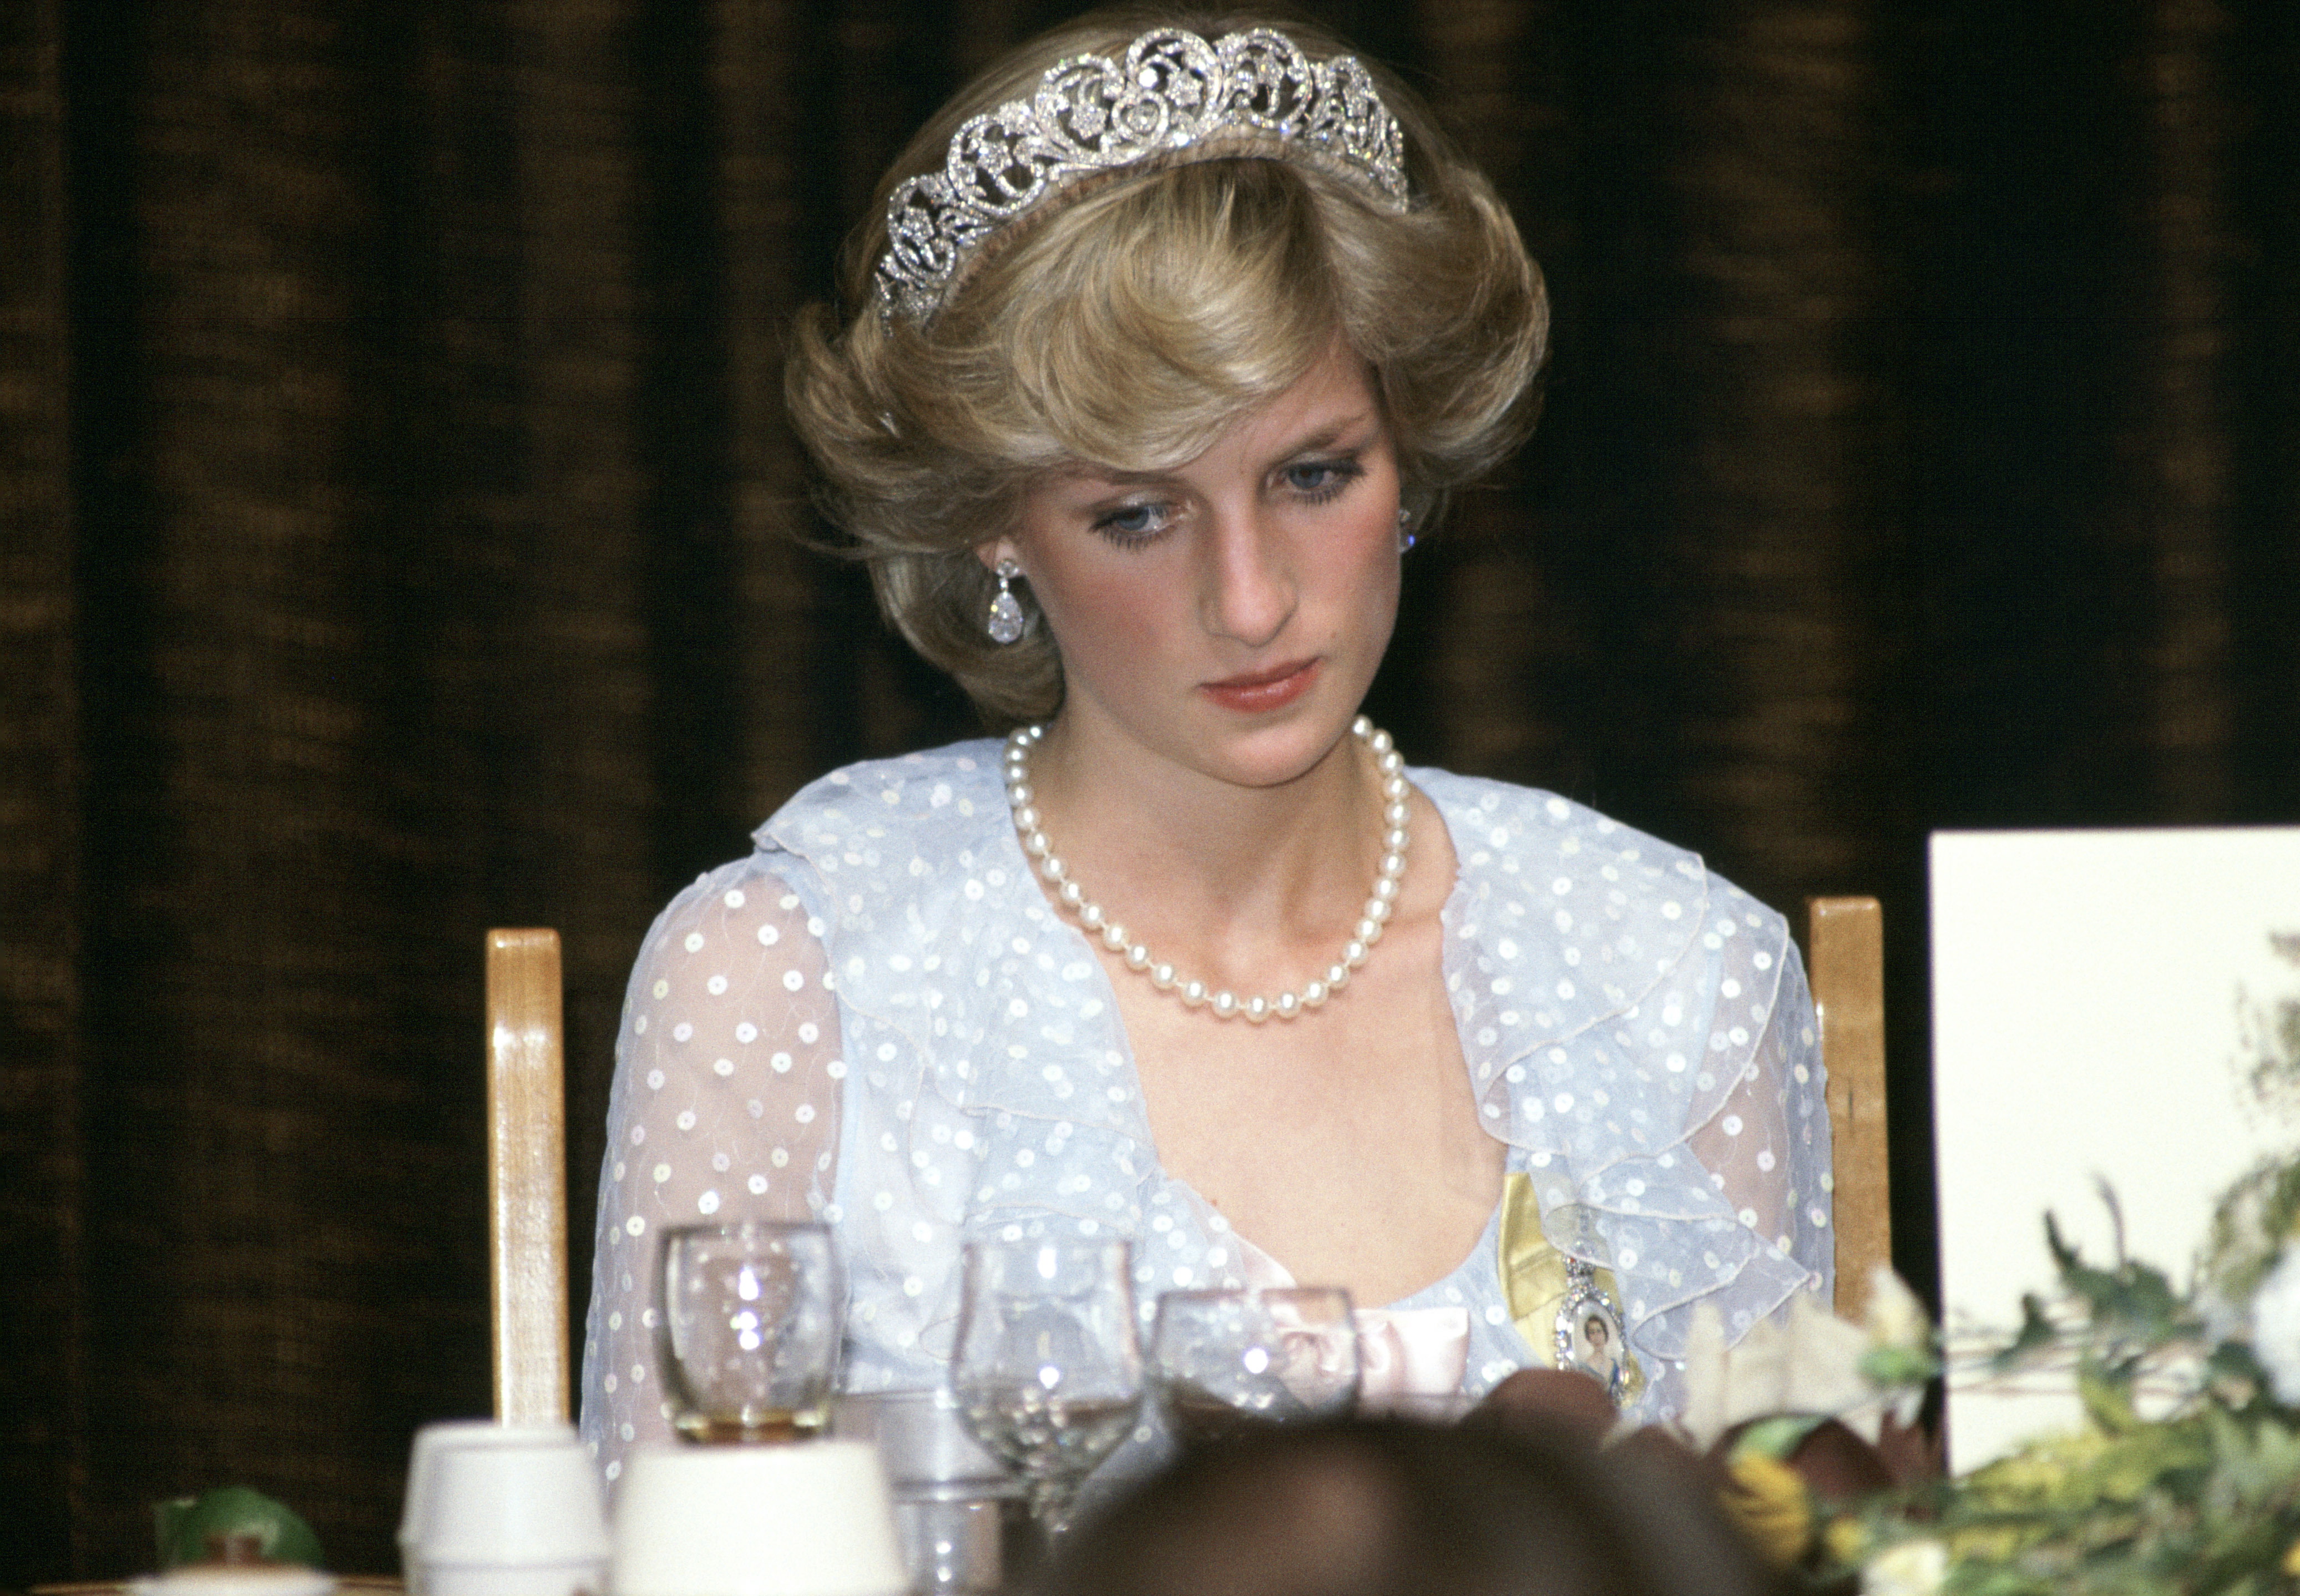 Princess Diana wore a blue chiffon evening dress designed by fashion designers David and Elizabeth Emanuel at a banquet in New Zealand on April 20, 1983. | Source: Getty Images